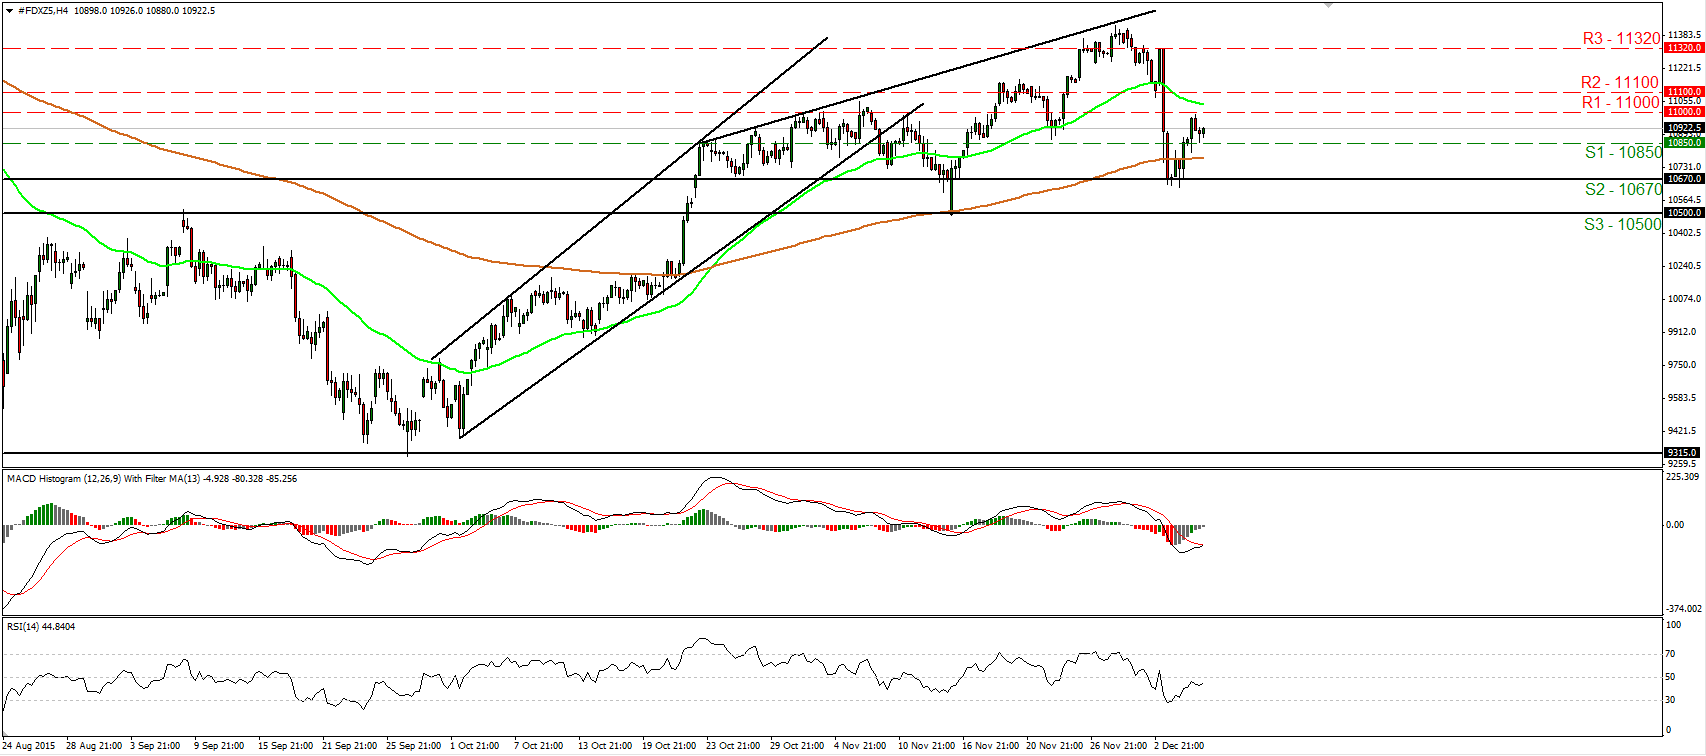 DAX Futures 4 Hour Chart